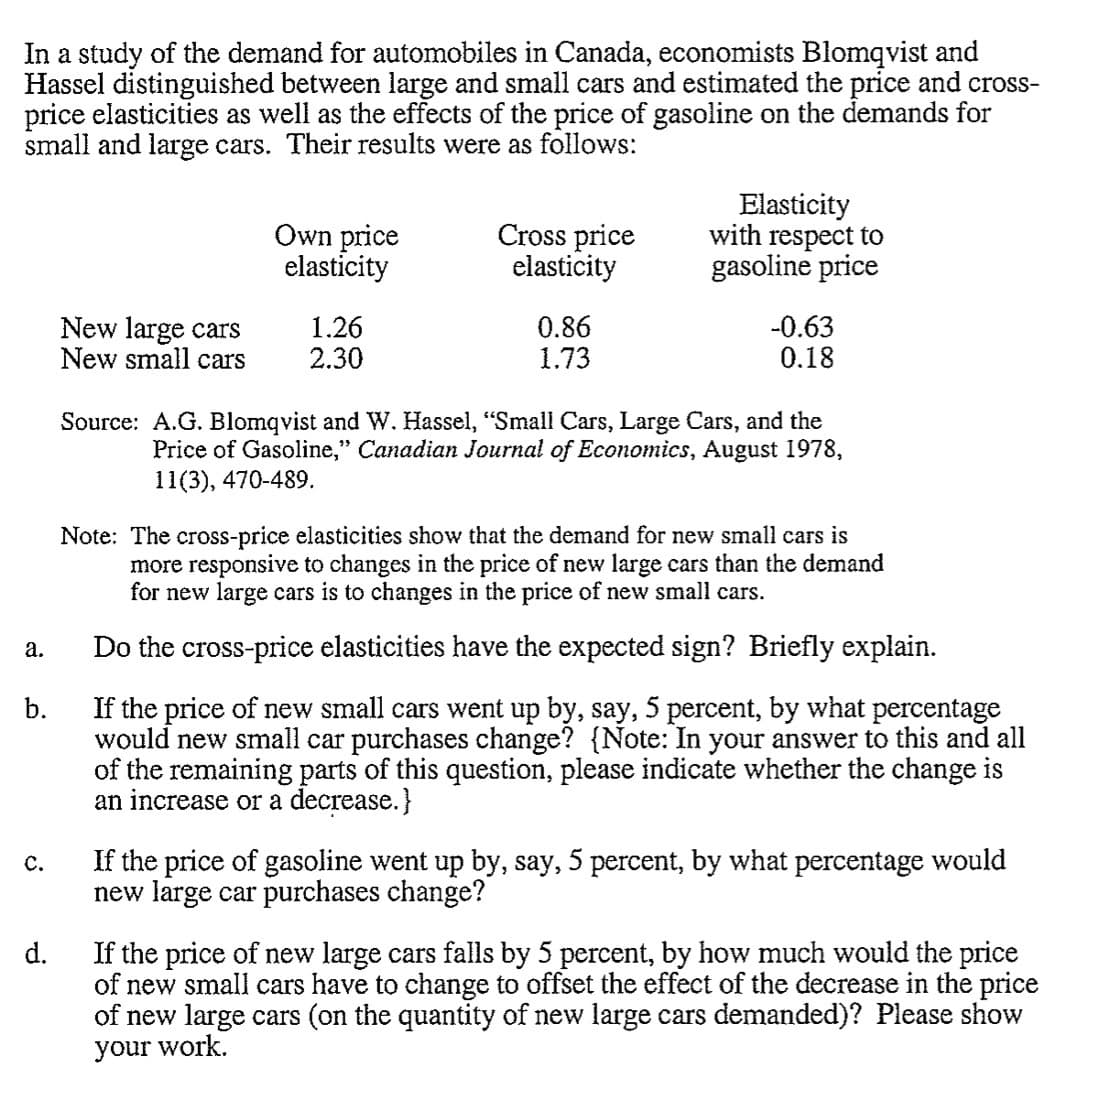 In a study of the demand for automobiles in Canada, economists Blomqvist and
Hassel distinguished between large and small cars and estimated the price and cross-
price elasticities as well as the effects of the price of gasoline on the demands for
small and large cars. Their results were as follows:
a.
C.
New large cars
New small cars
d.
Own price
elasticity
1.26
2.30
Cross price
elasticity
0.86
1.73
Elasticity
with respect to
gasoline price
Note: The cross-price elasticities show that the demand for new small cars is
more responsive to changes in the price of new large cars than the demand
for new large cars is to changes in the price of new small cars.
Do the cross-price elasticities have the expected sign? Briefly explain.
b.
If the price of new small cars went up by, say, 5 percent, by what percentage
would new small car purchases change? {Note: In your answer to this and all
of the remaining parts of this question, please indicate whether the change is
an increase or a decrease.}
-0.63
0.18
Source: A.G. Blomqvist and W. Hassel, "Small Cars, Large Cars, and the
Price of Gasoline," Canadian Journal of Economics, August 1978,
11(3), 470-489.
If the price of gasoline went up by, say, 5 percent, by what percentage would
new large car purchases change?
If the price of new large cars falls by 5 percent, by how much would the price
of new small cars have to change to offset the effect of the decrease in the price
of new large cars (on the quantity of new large cars demanded)? Please show
your work.